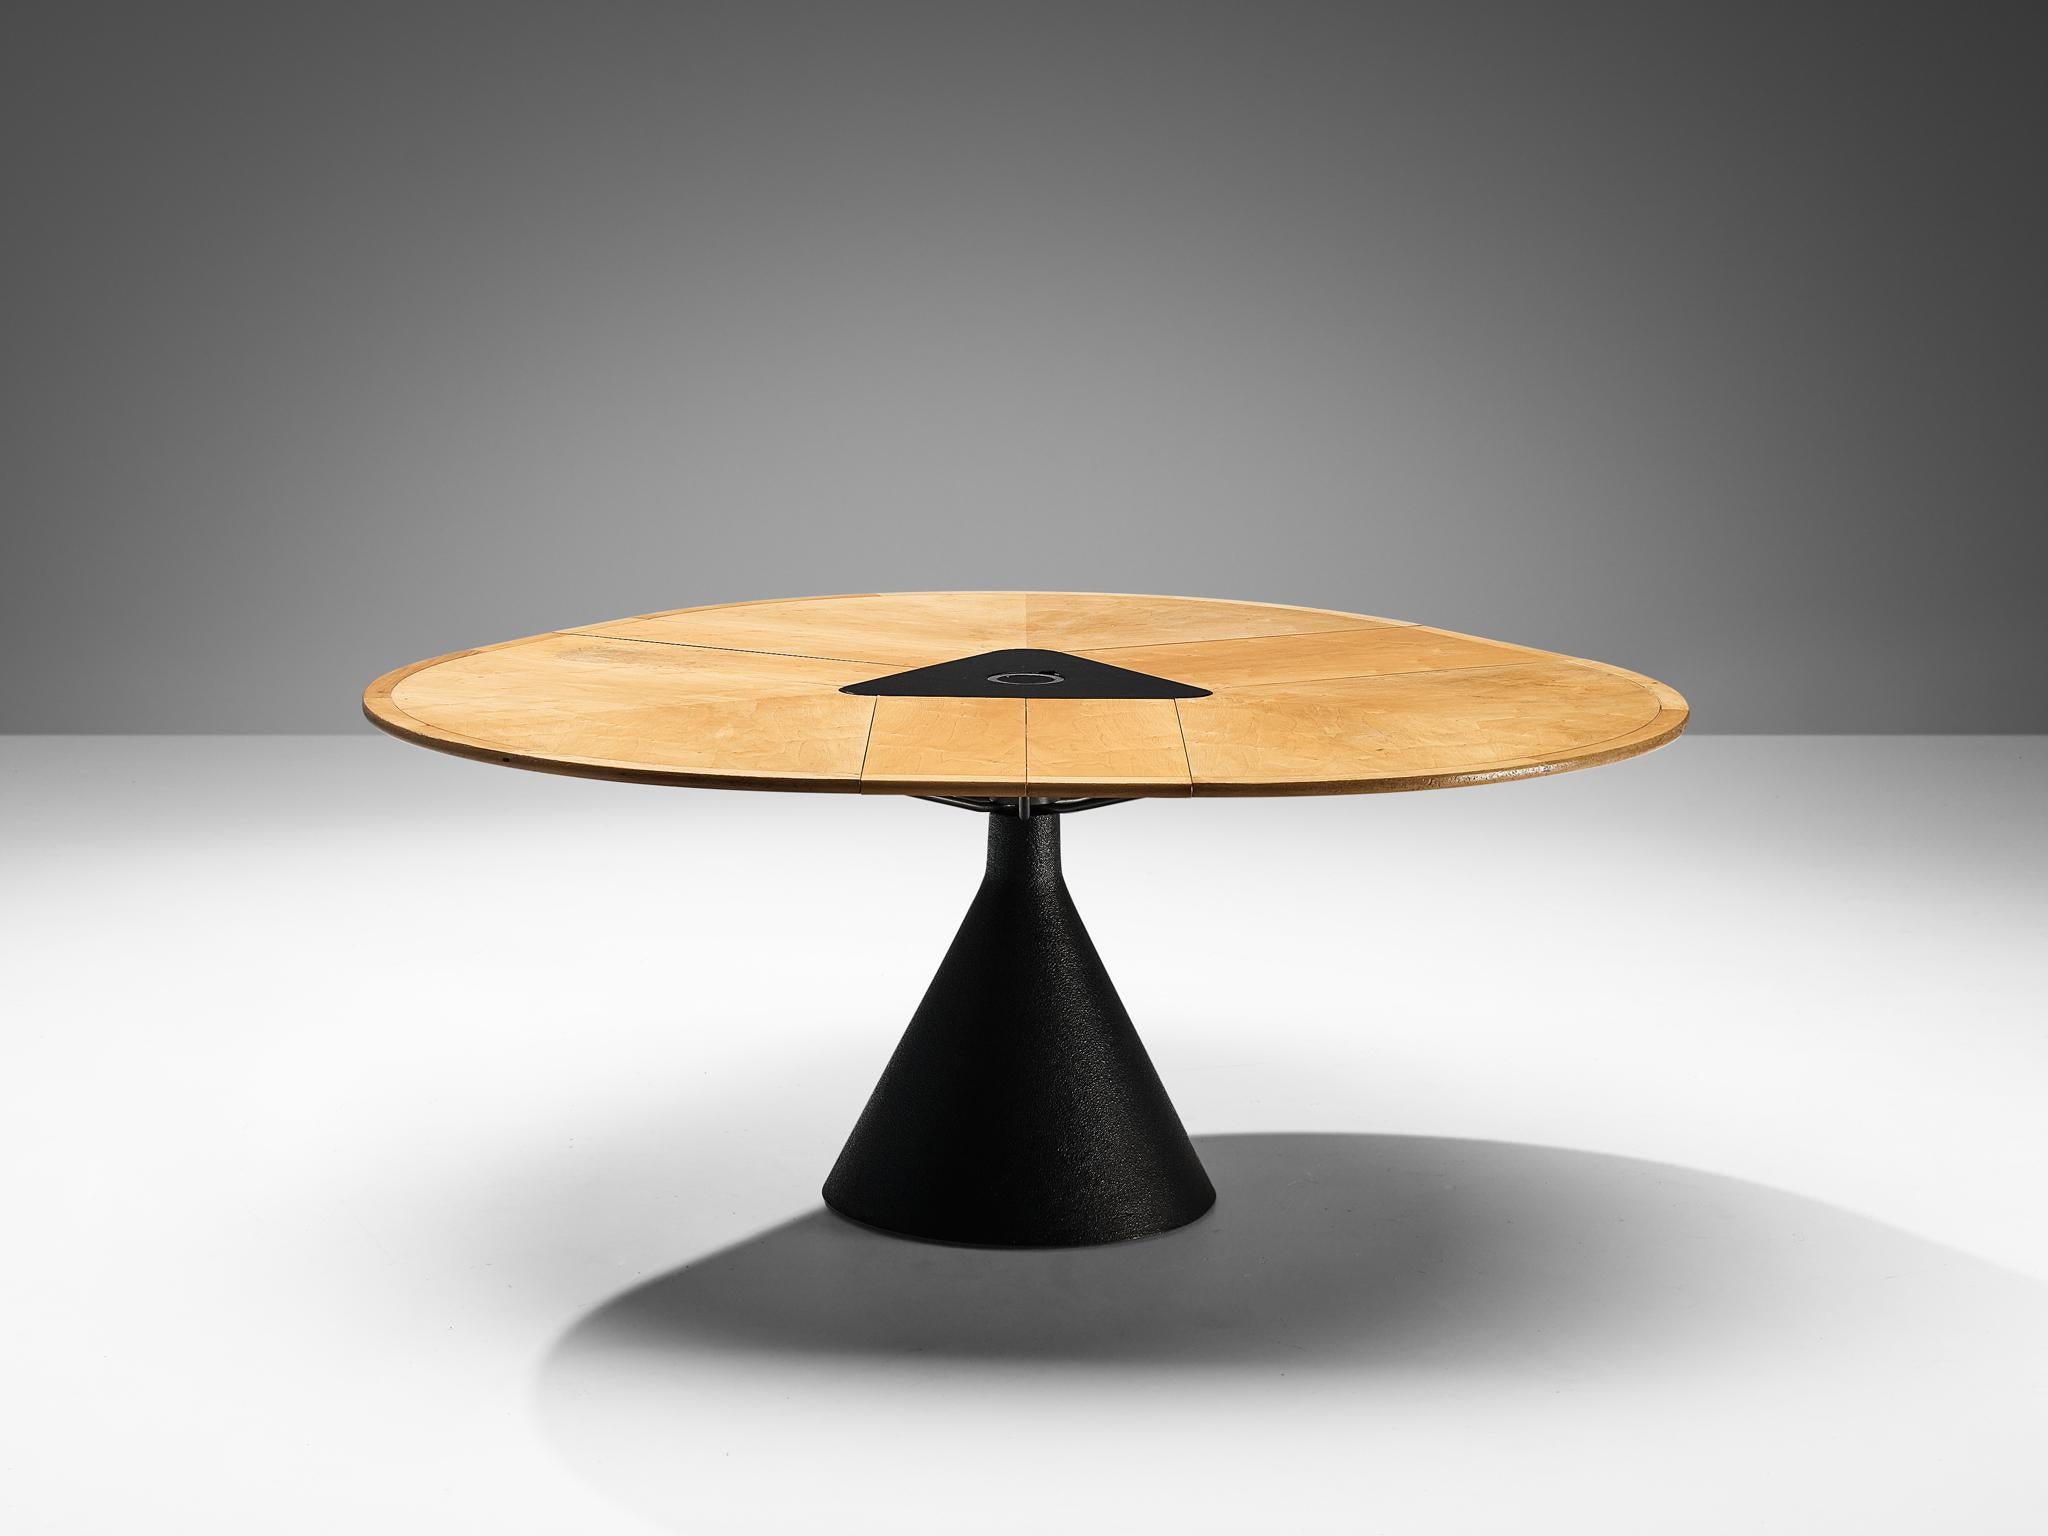 Francesco Fois for Bernini, 'Click' dining table maple, metal, Italy, 1986
 
The table model Click, conceived by Francesco Fois for Bernini in the year 1986, stands as a testament to functional elegance. Its foundation is a cone-shaped metal base,